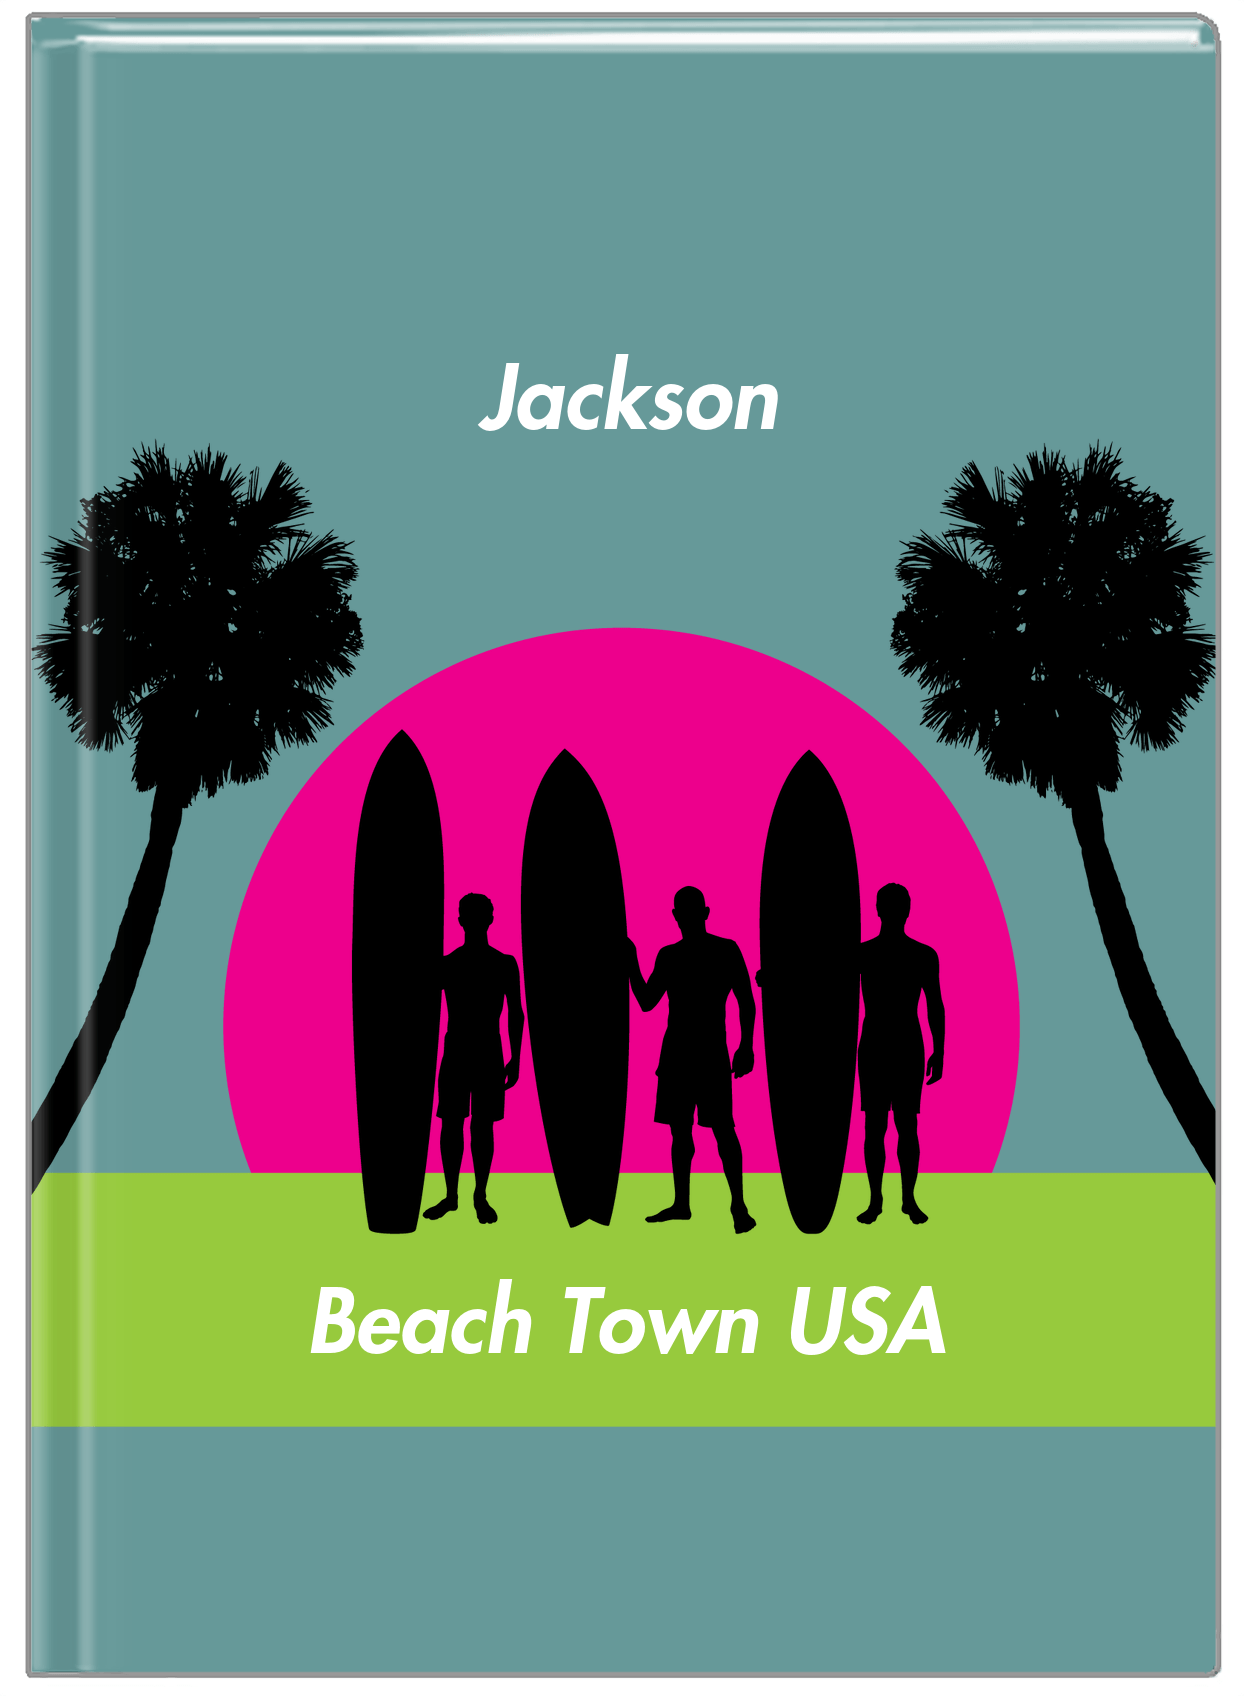 Personalized Beach Journal XVII - Beach Town - Teal Background - Front View